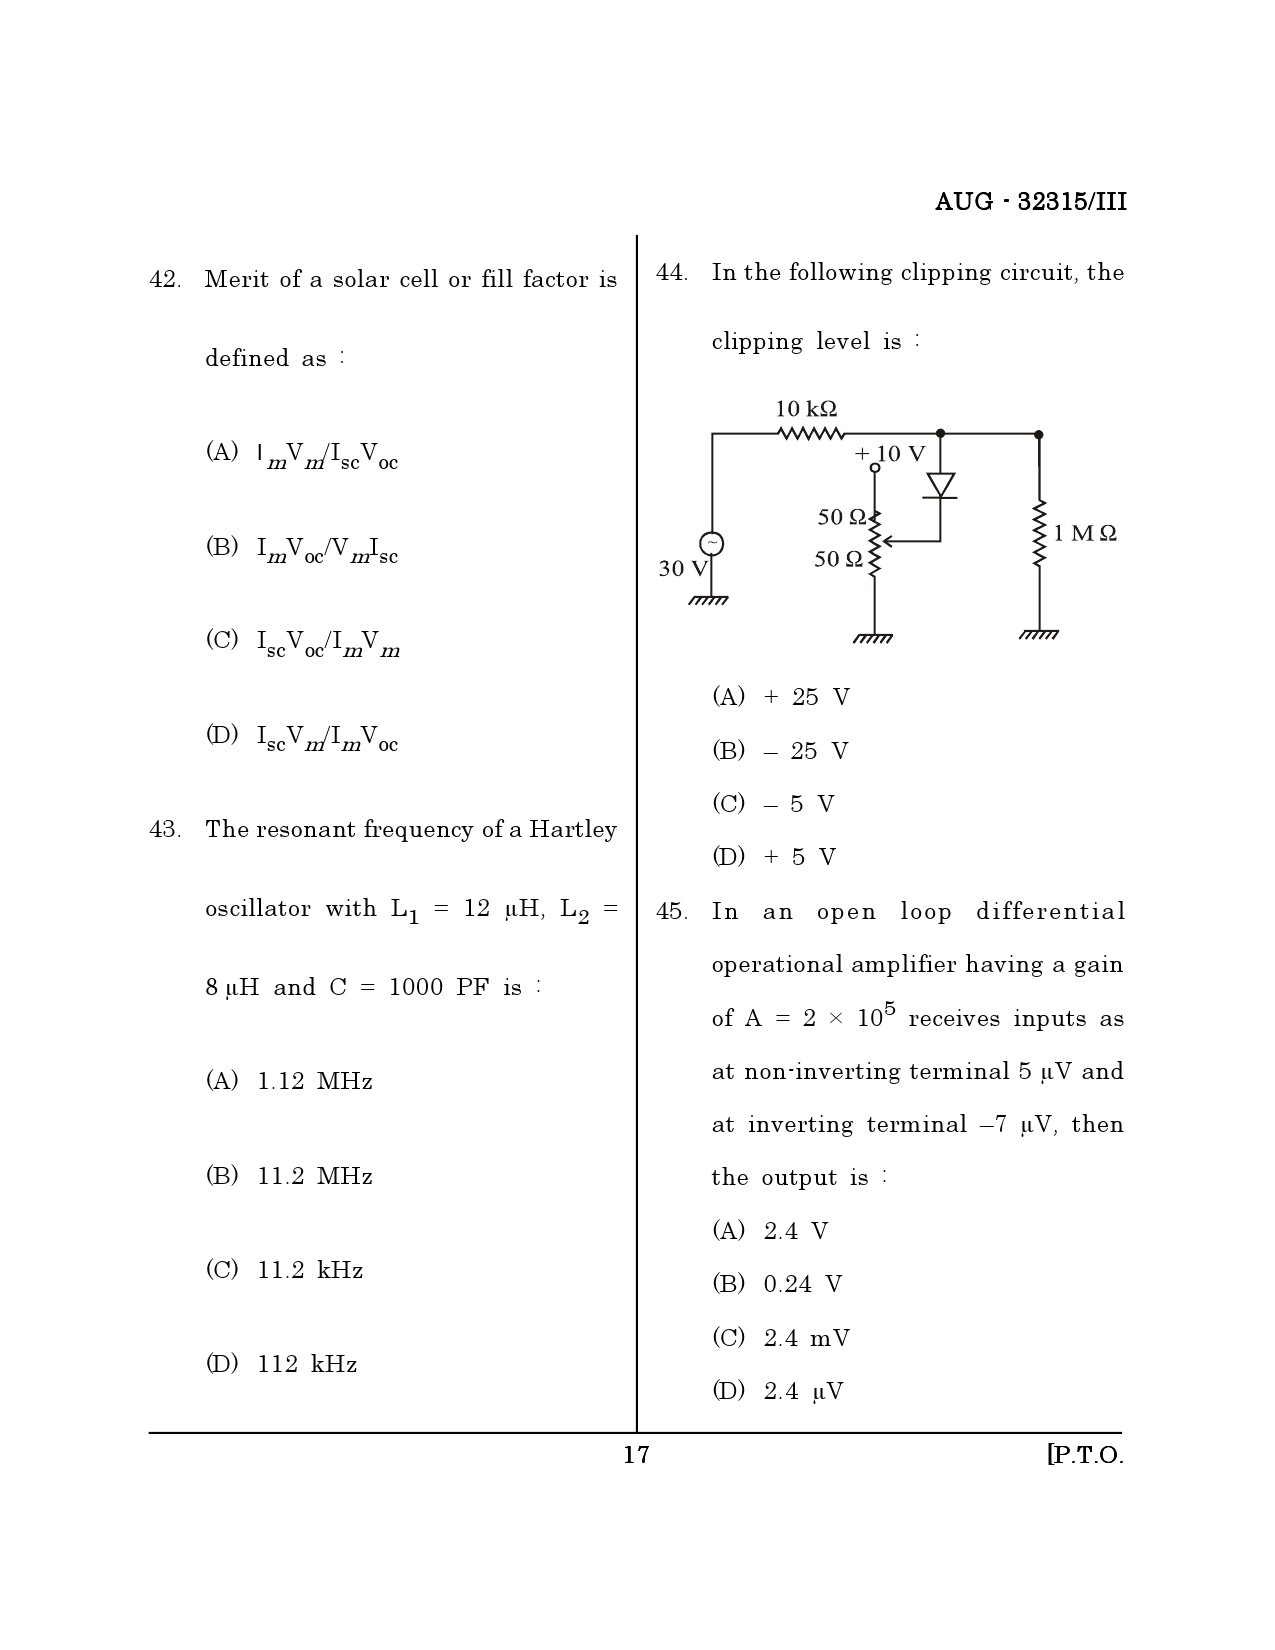 Maharashtra SET Physical Science Question Paper III August 2015 16